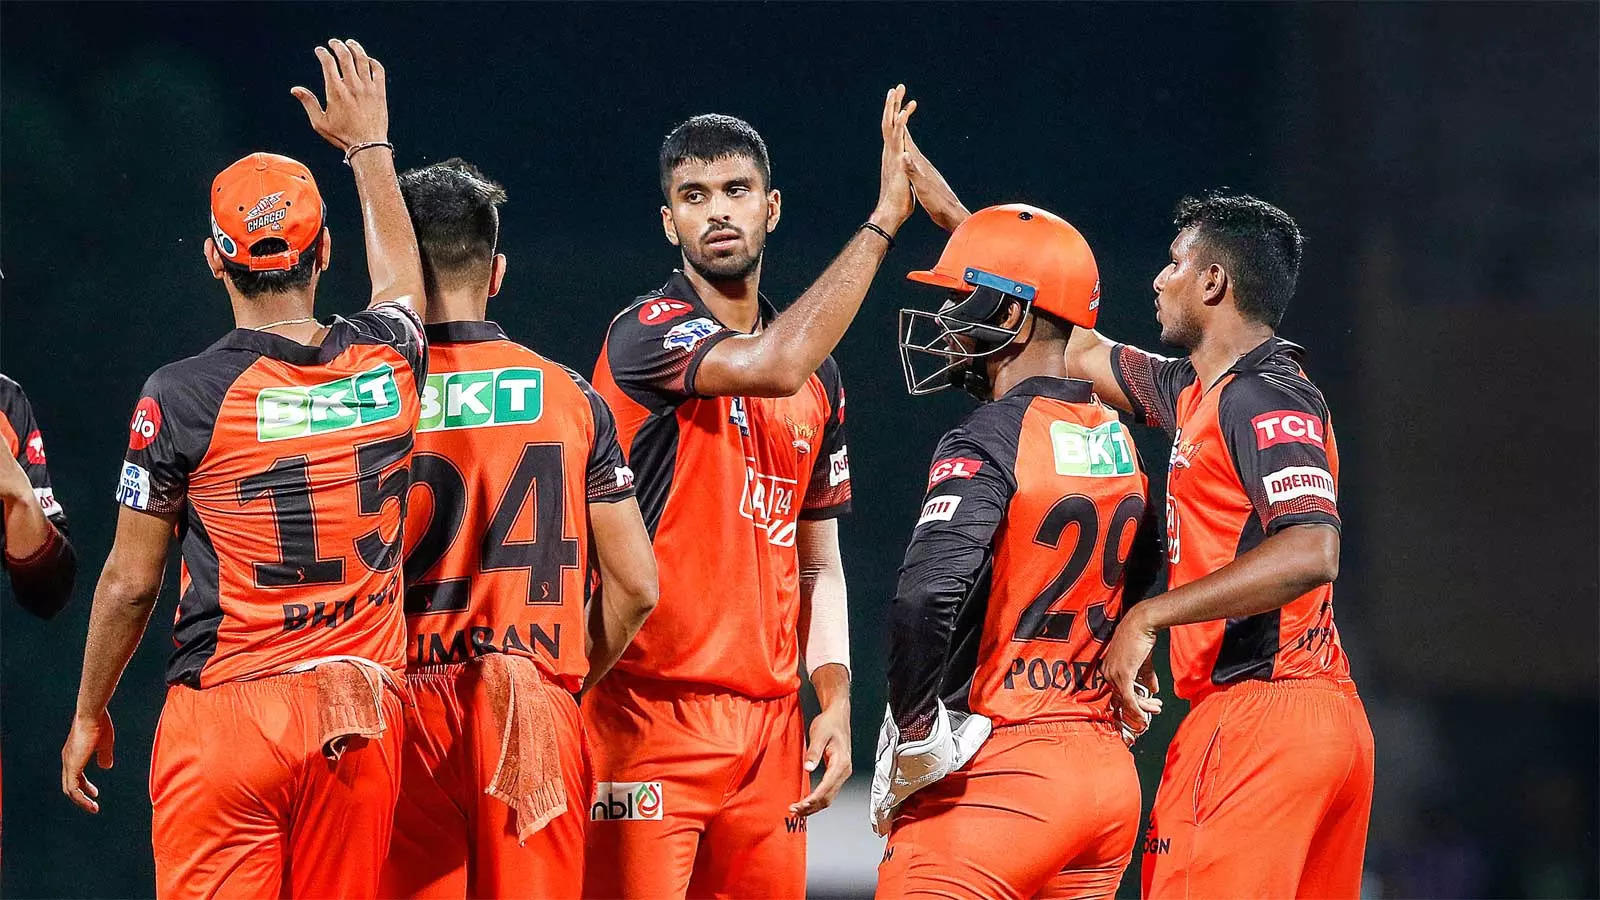 Washinton Sundar likely to miss SRH's next two games